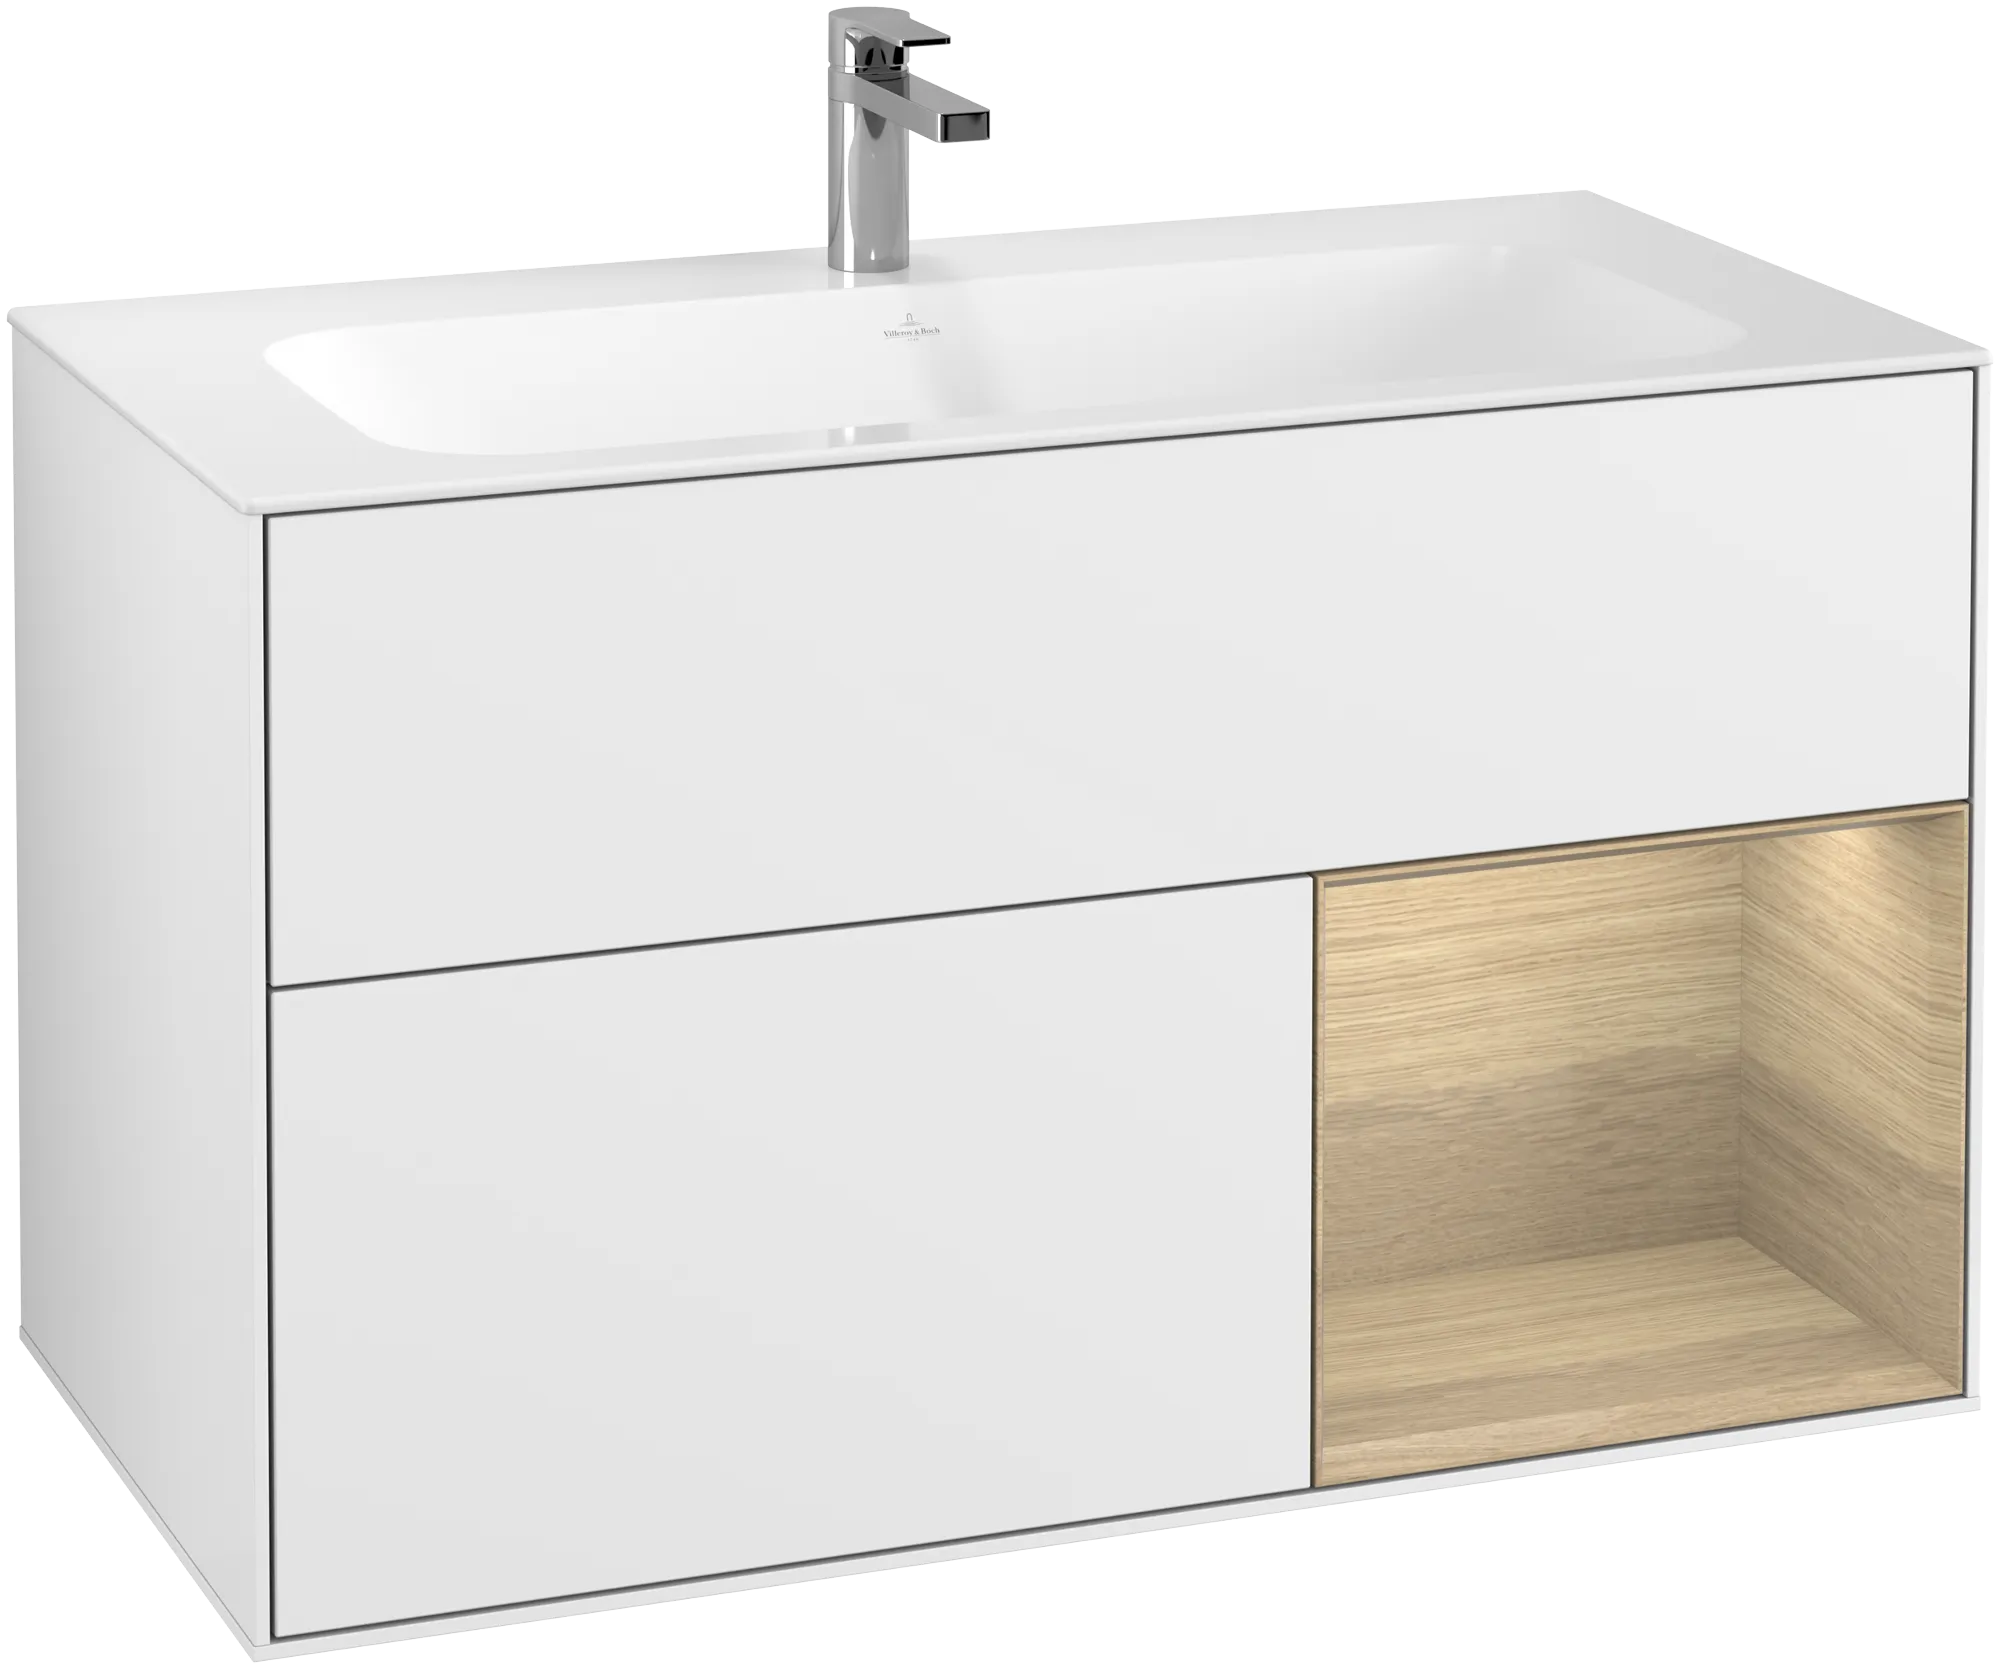 Picture of VILLEROY BOCH Finion Vanity unit, with lighting, 2 pull-out compartments, 996 x 591 x 498 mm, Glossy White Lacquer / Oak Veneer #G040PCGF